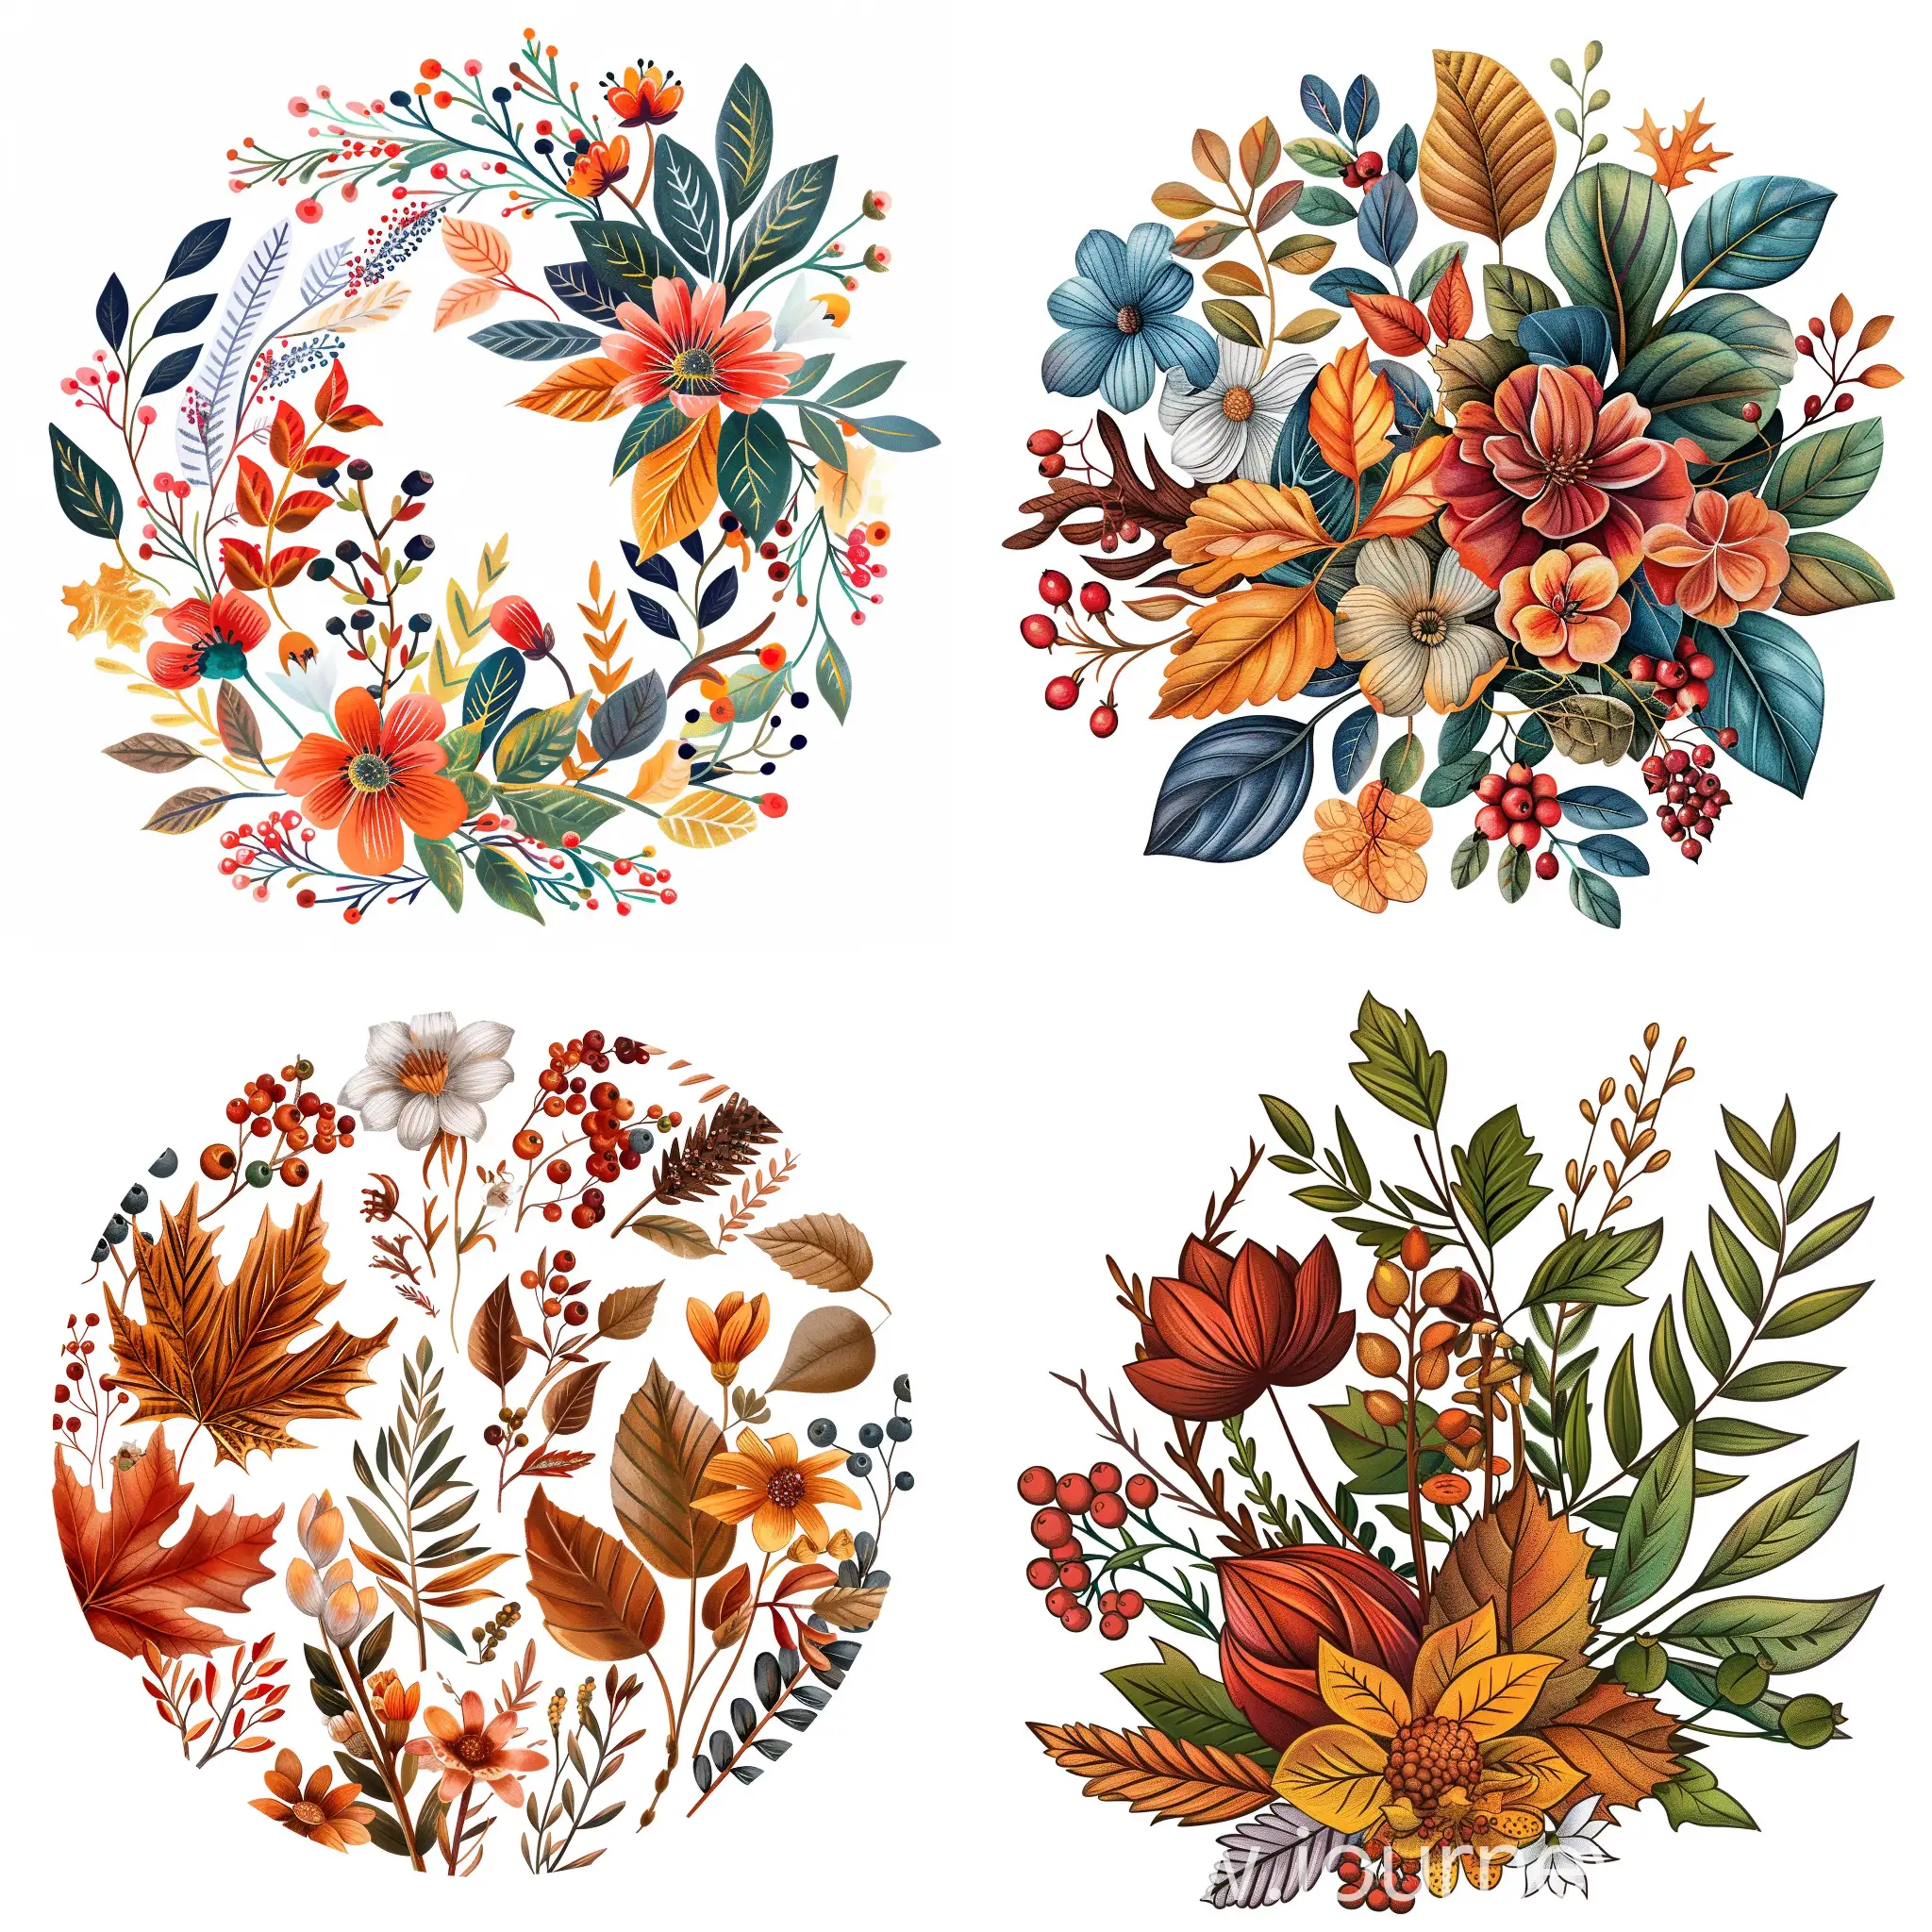 round ornament dedicated to autumn, including autumn leaves, flowers, berries, on a white background, decorative illustration